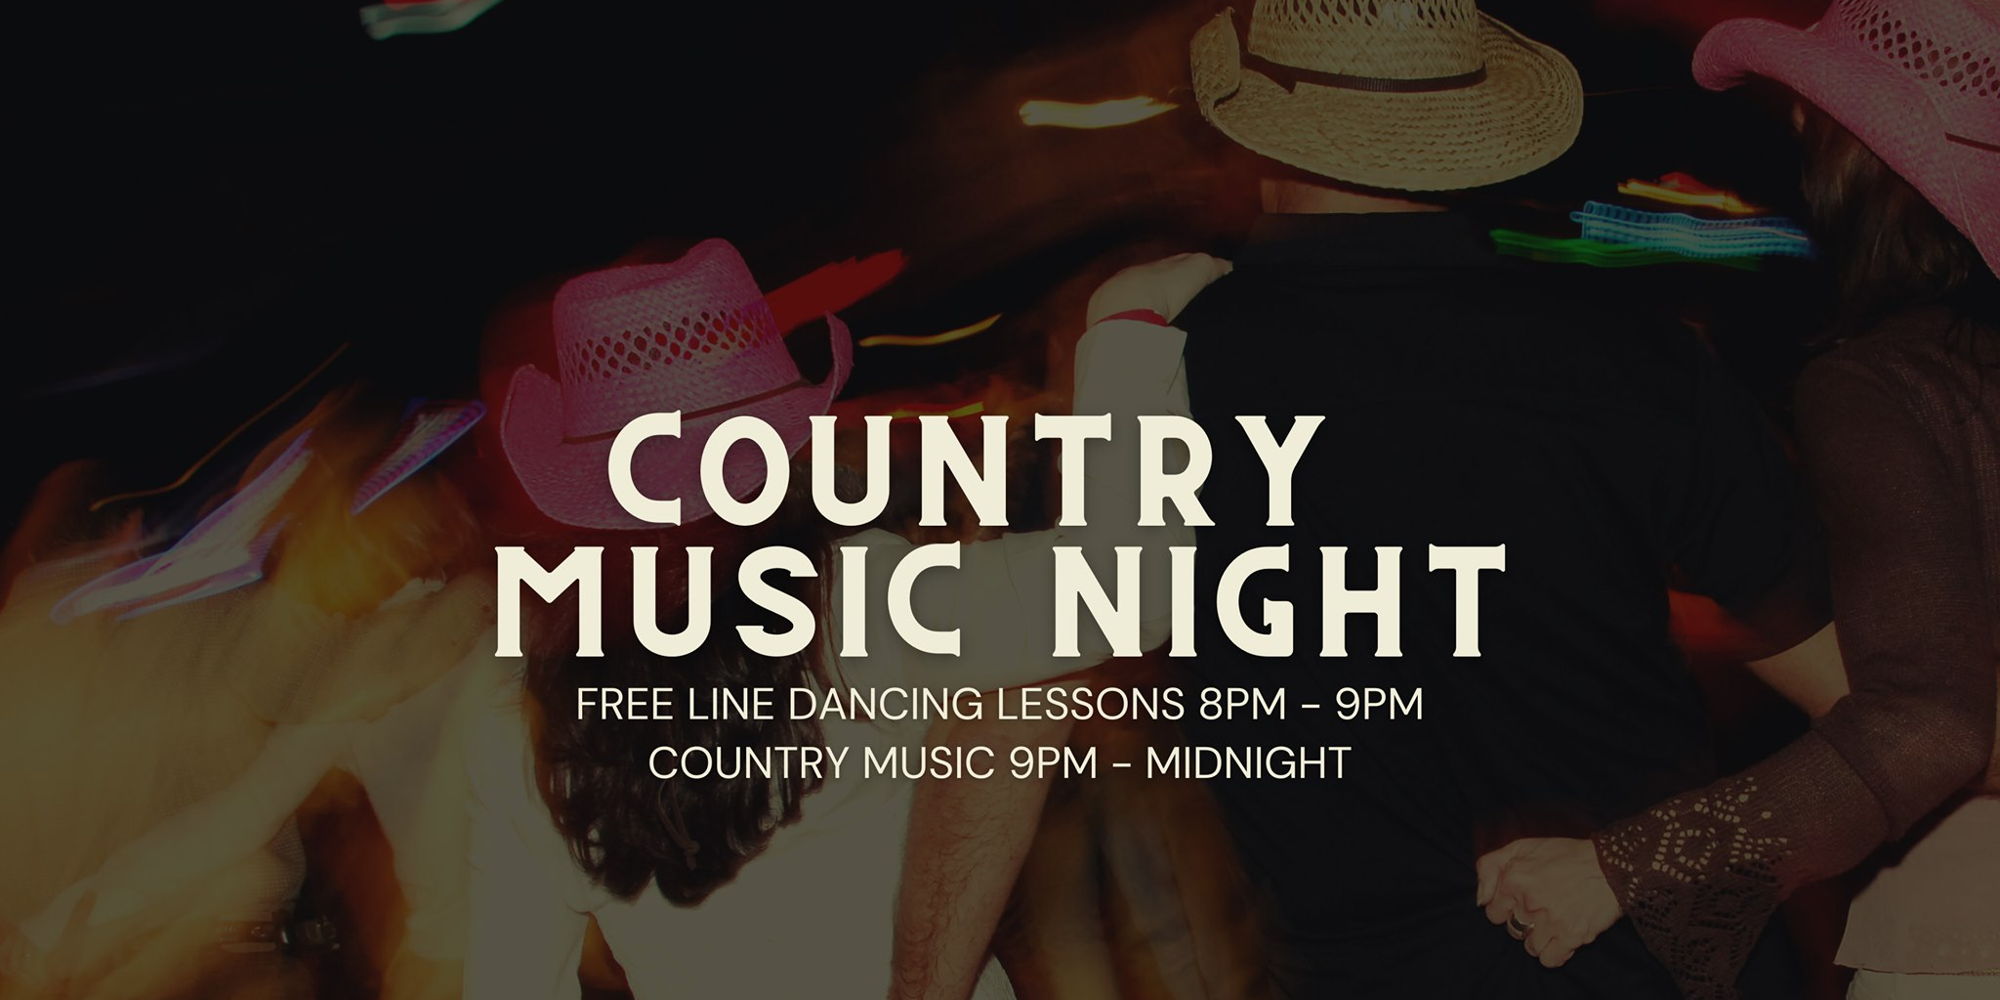 Country Music Night Every Tuesday w/ Free Line Dancing Lessons promotional image